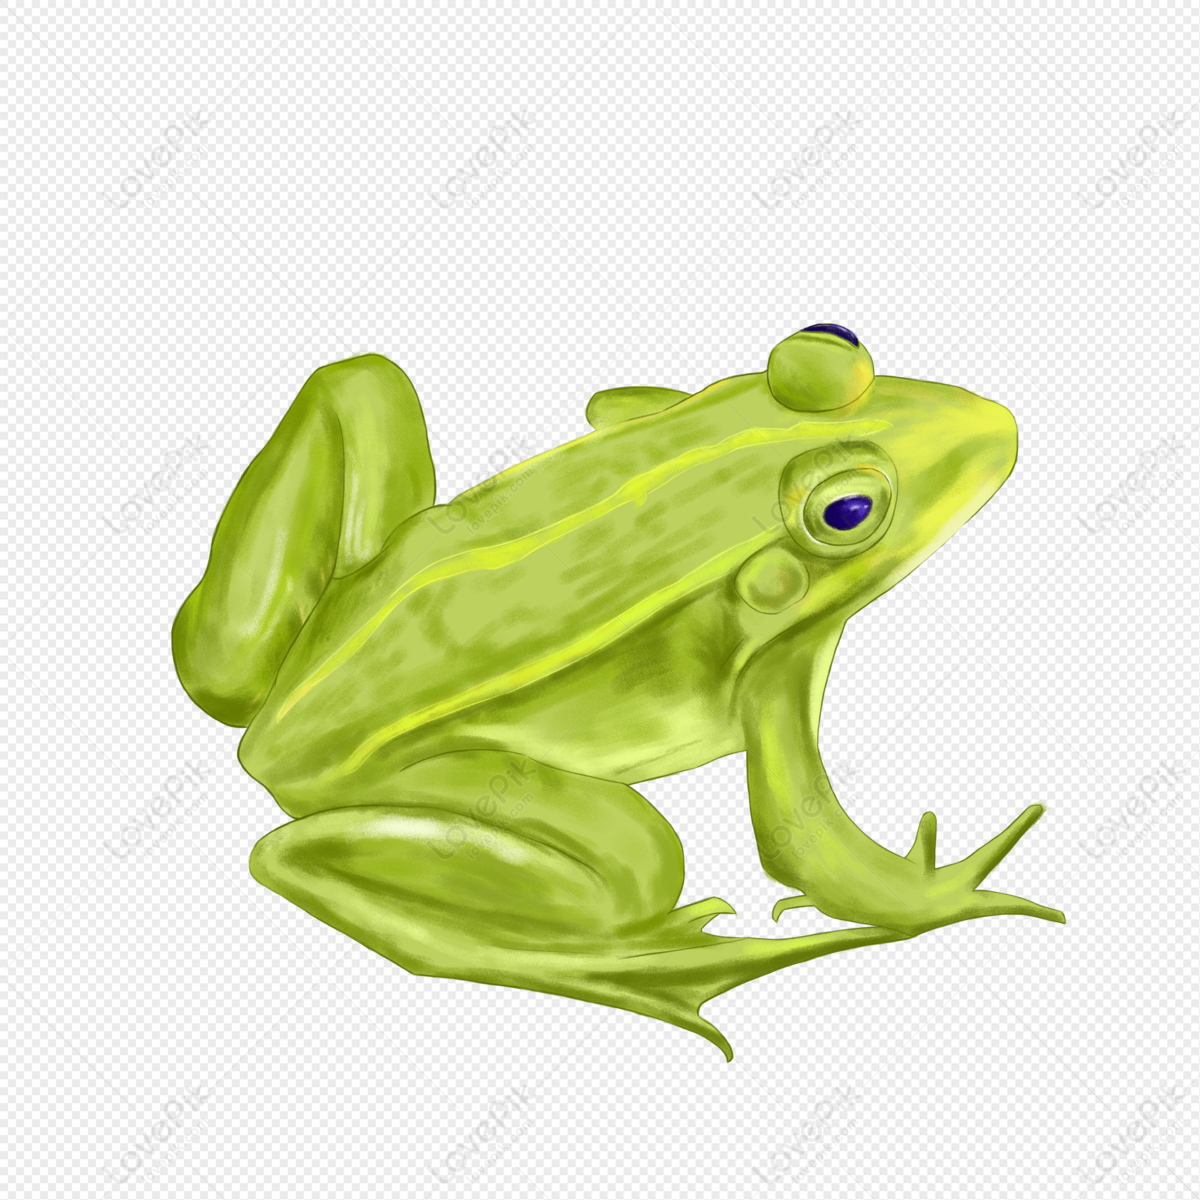 Cartoon frog with persimmons on its head, Cute frog, frogs, clown frog  king, lovely digital painting - SeaArt AI